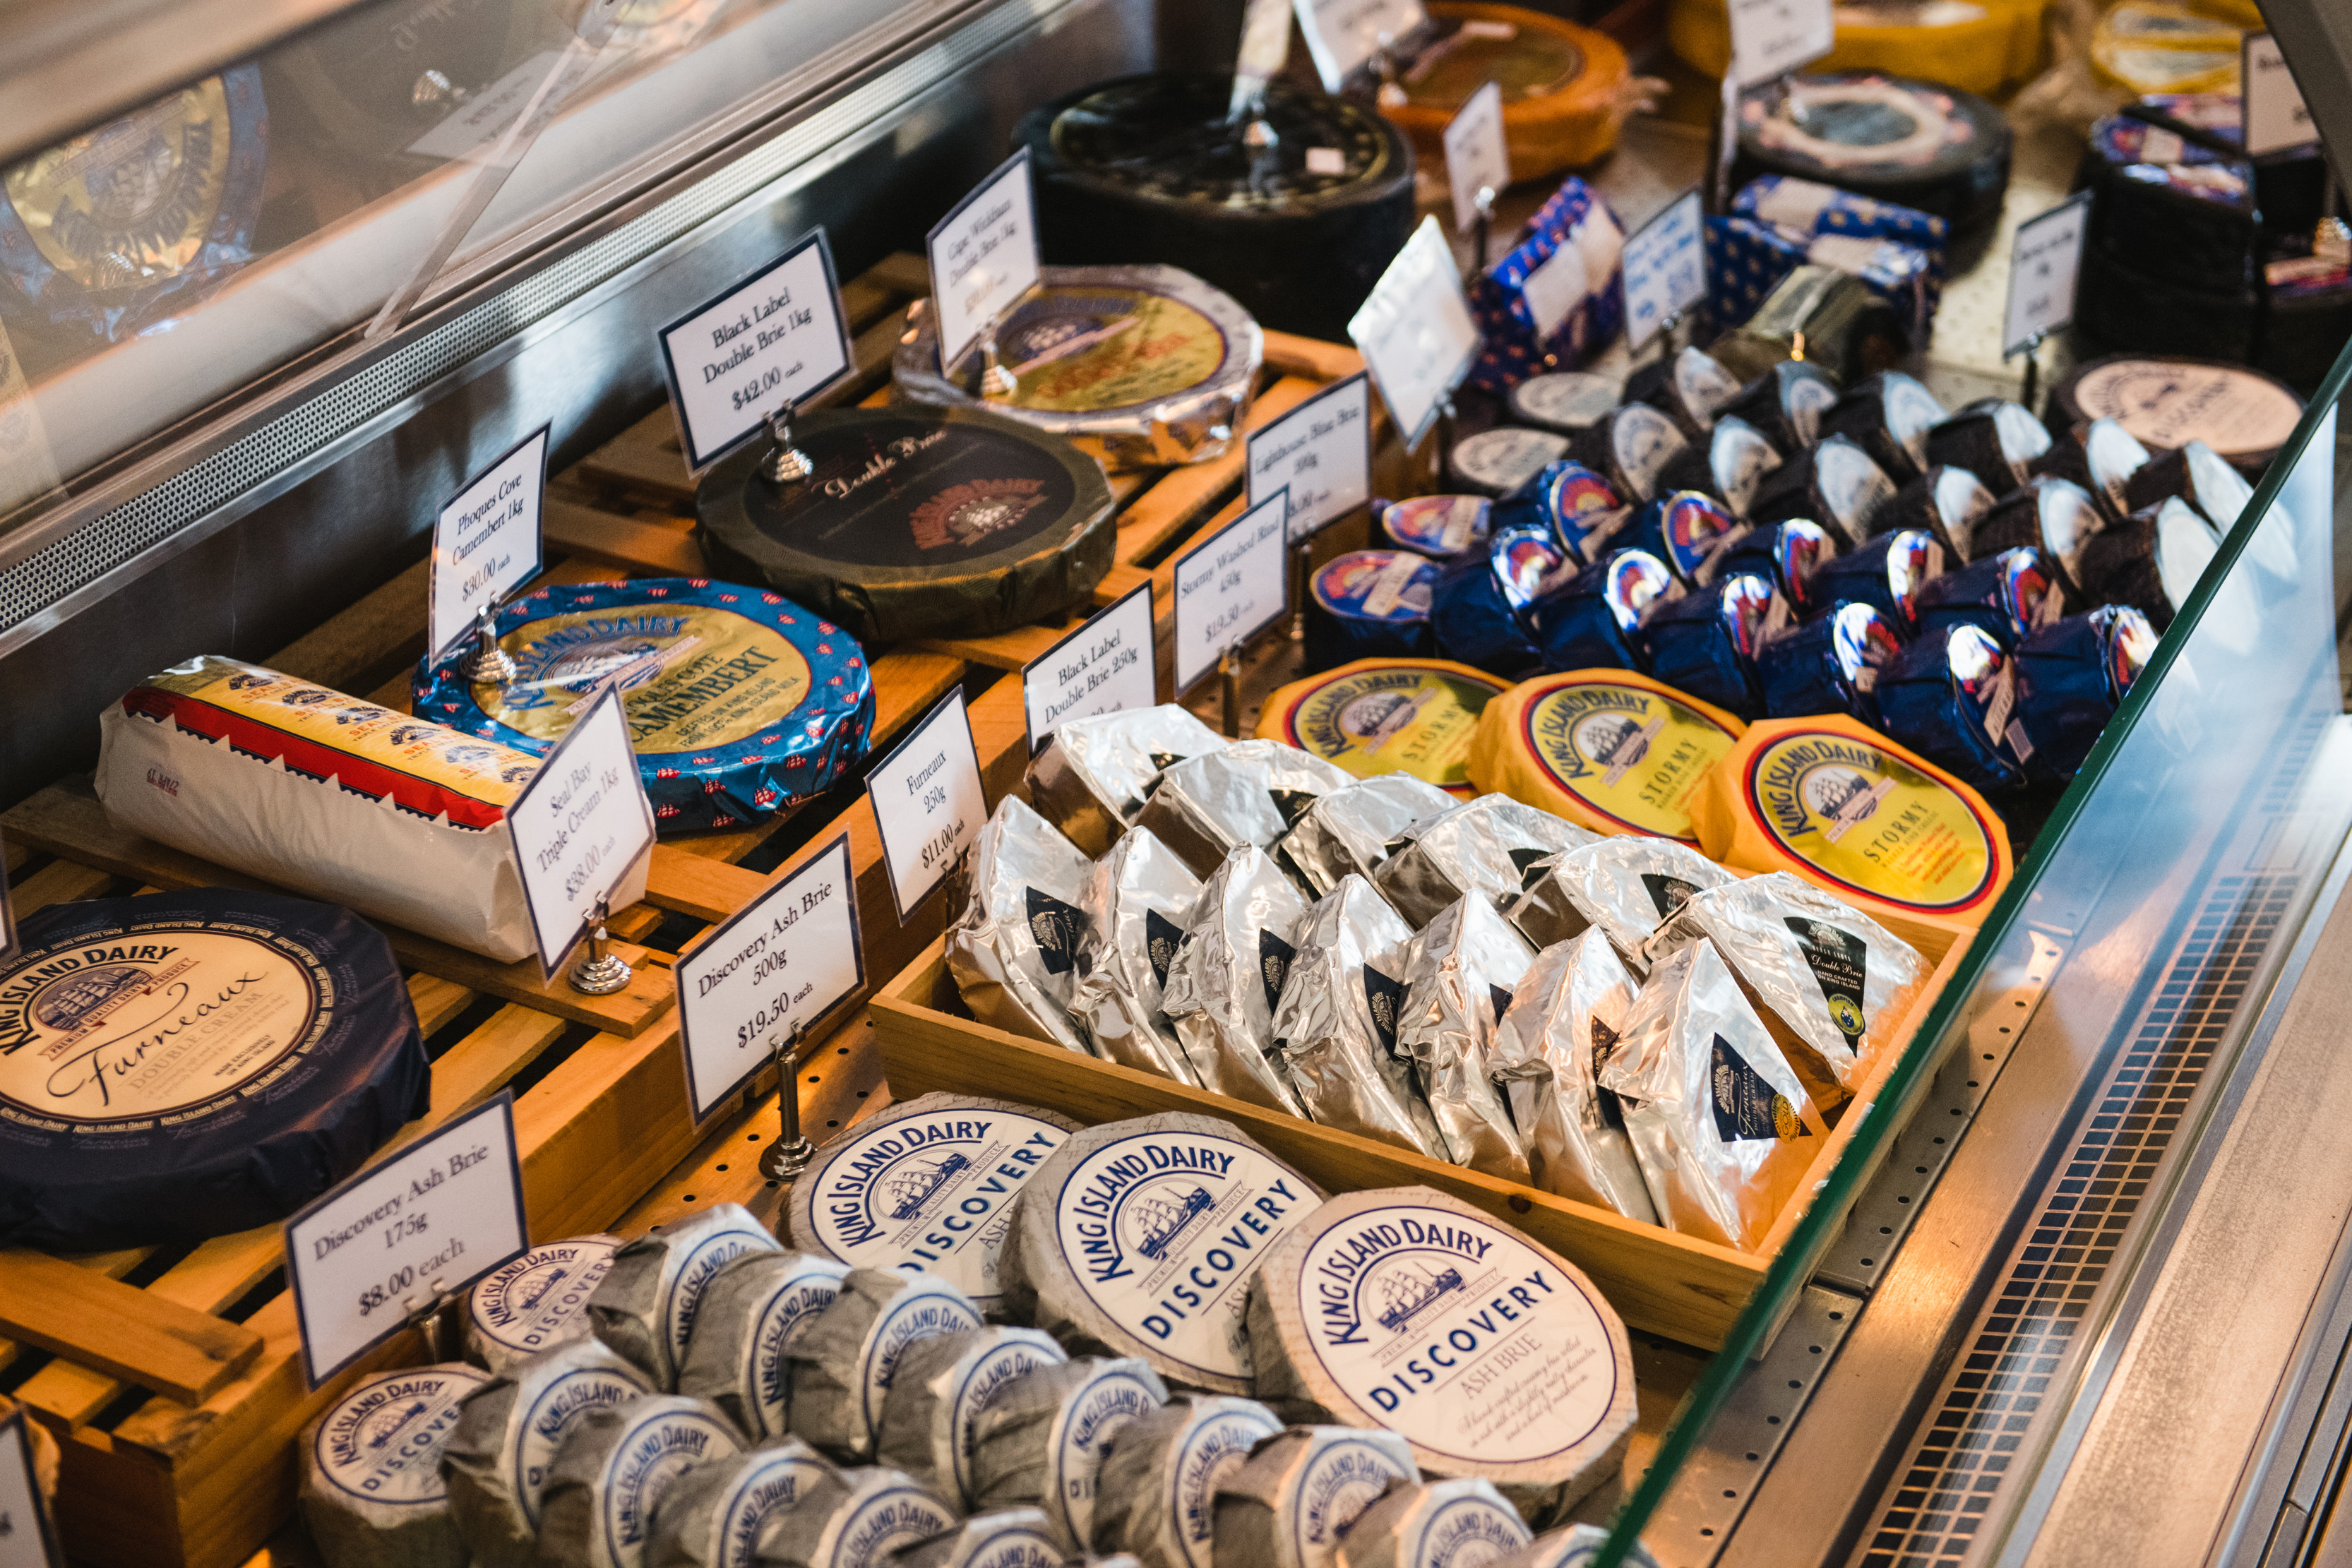 Close up image of a large variety of cheeses in the display of the King Island Dairy.